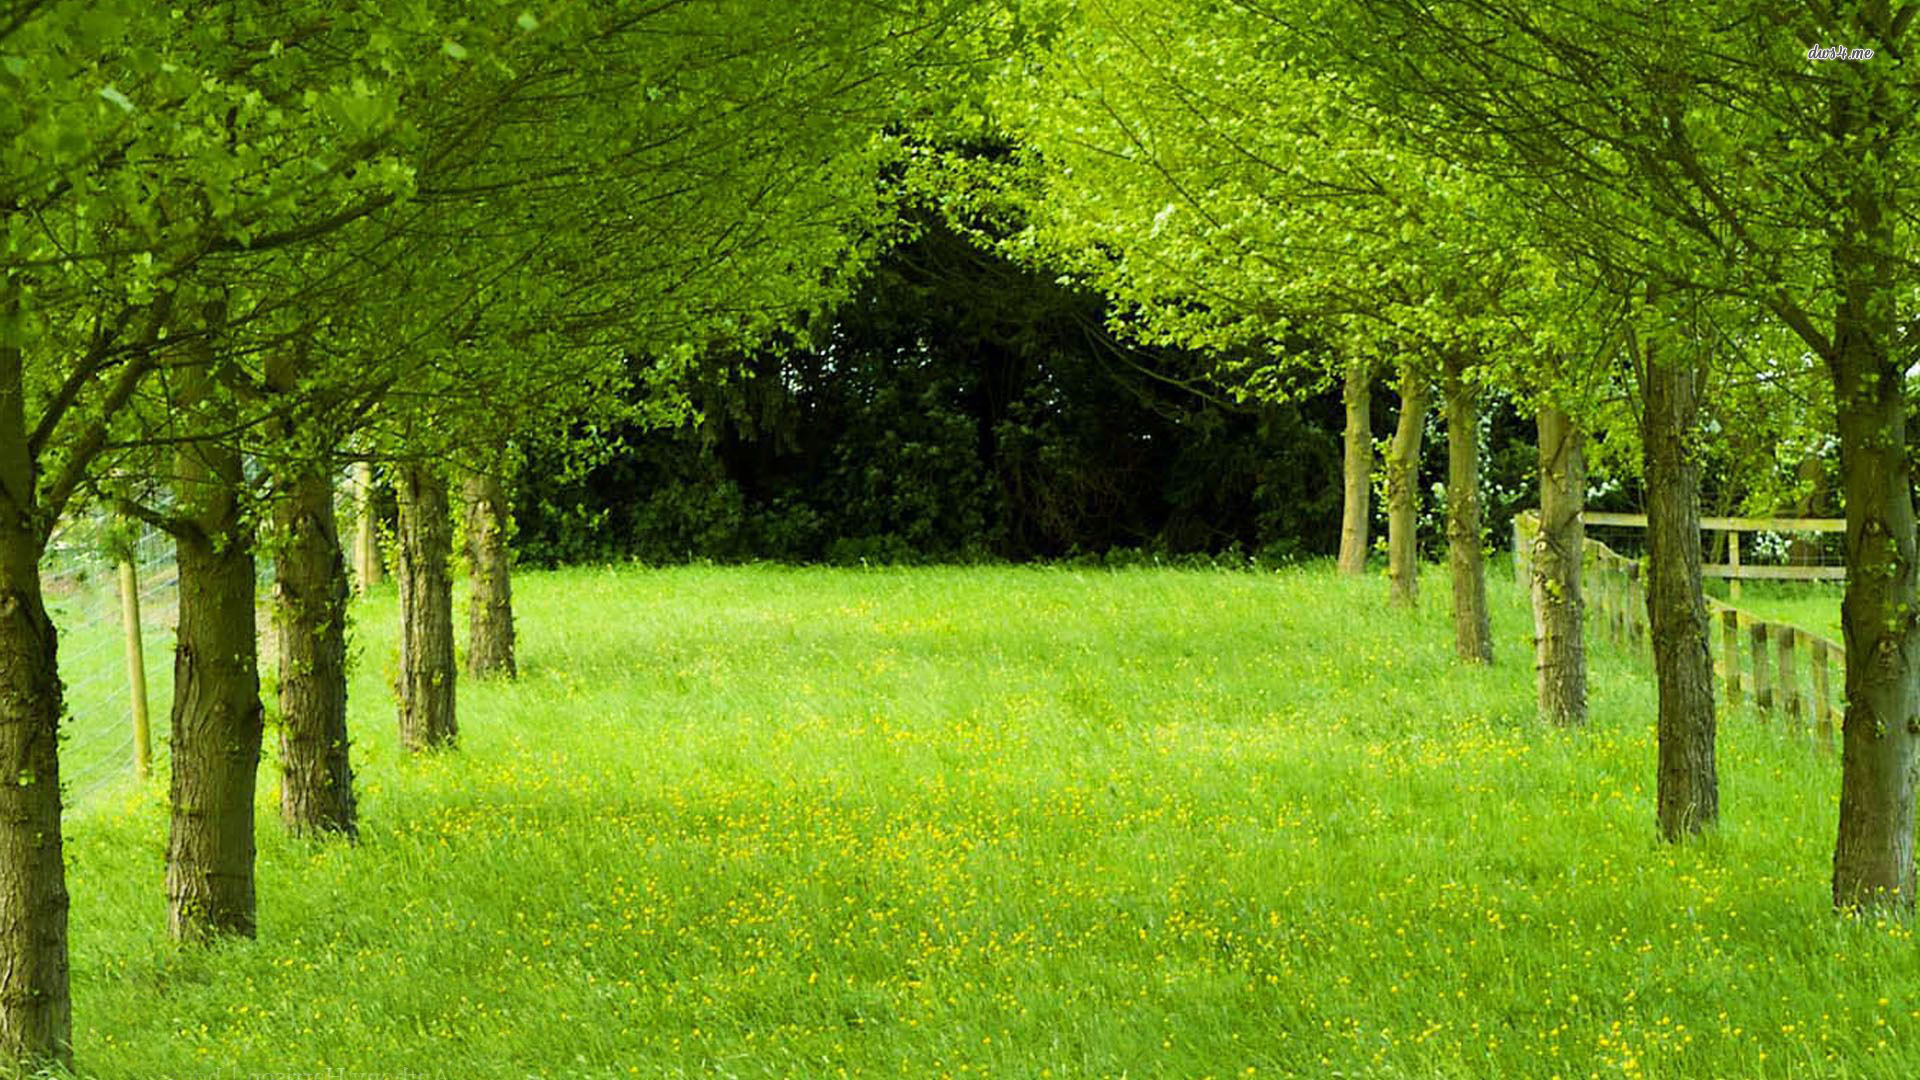 Green grass and trees wallpaper - Nature wallpapers - #20964